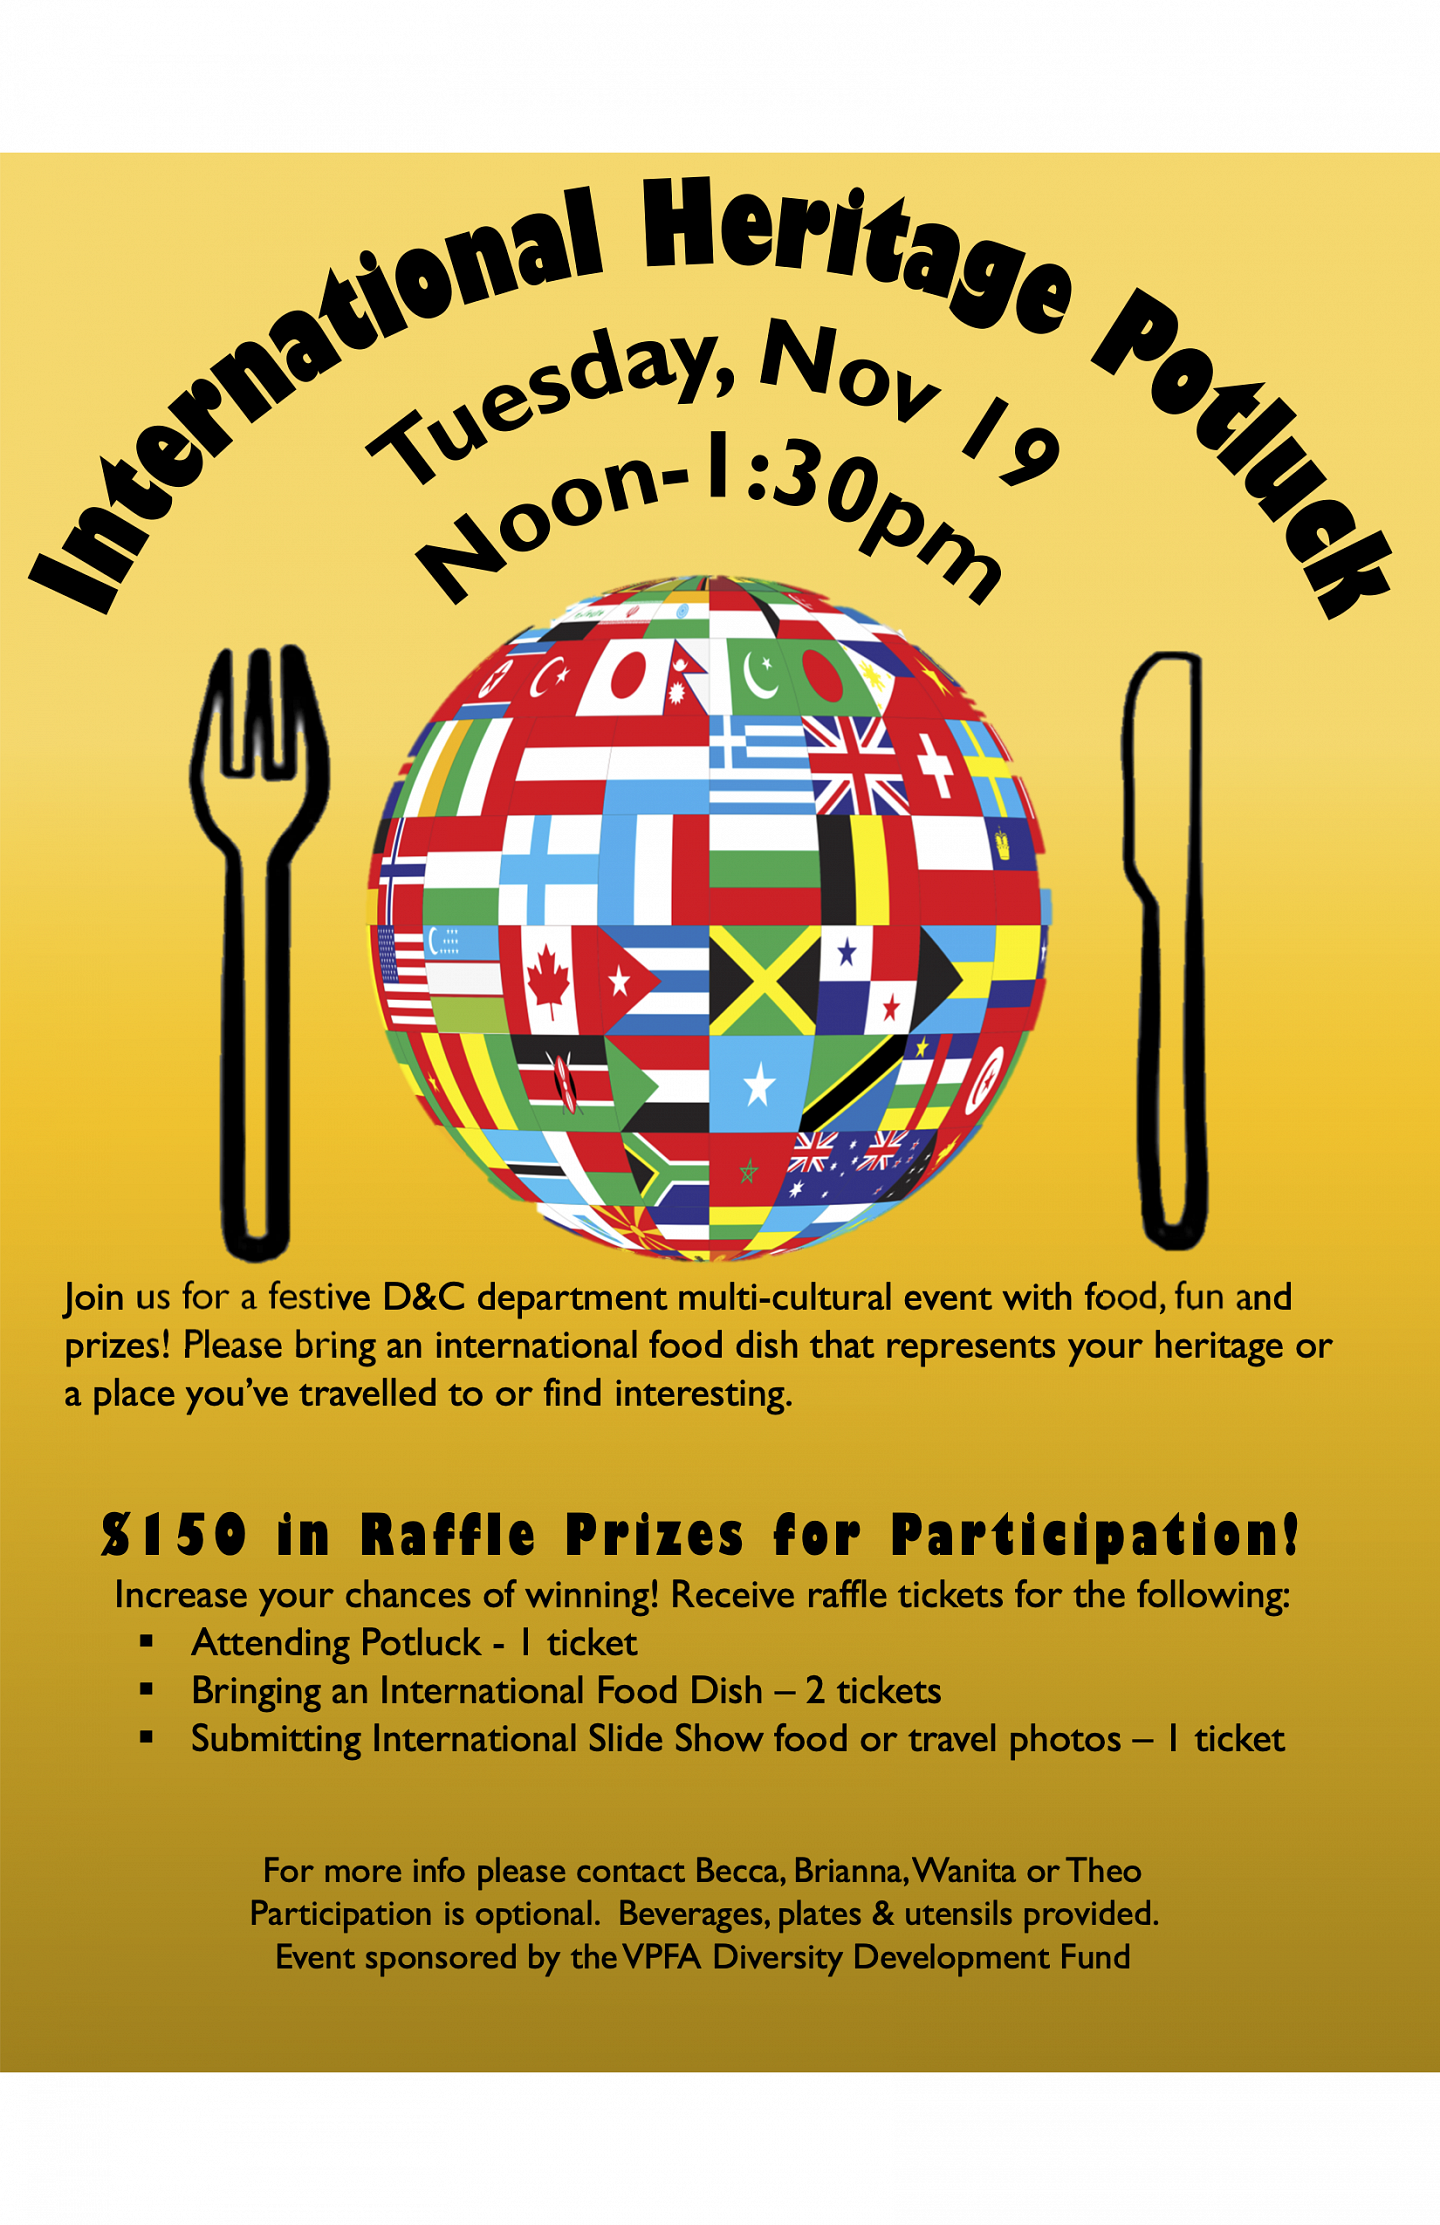 Flyer from the International Heritage Potluck